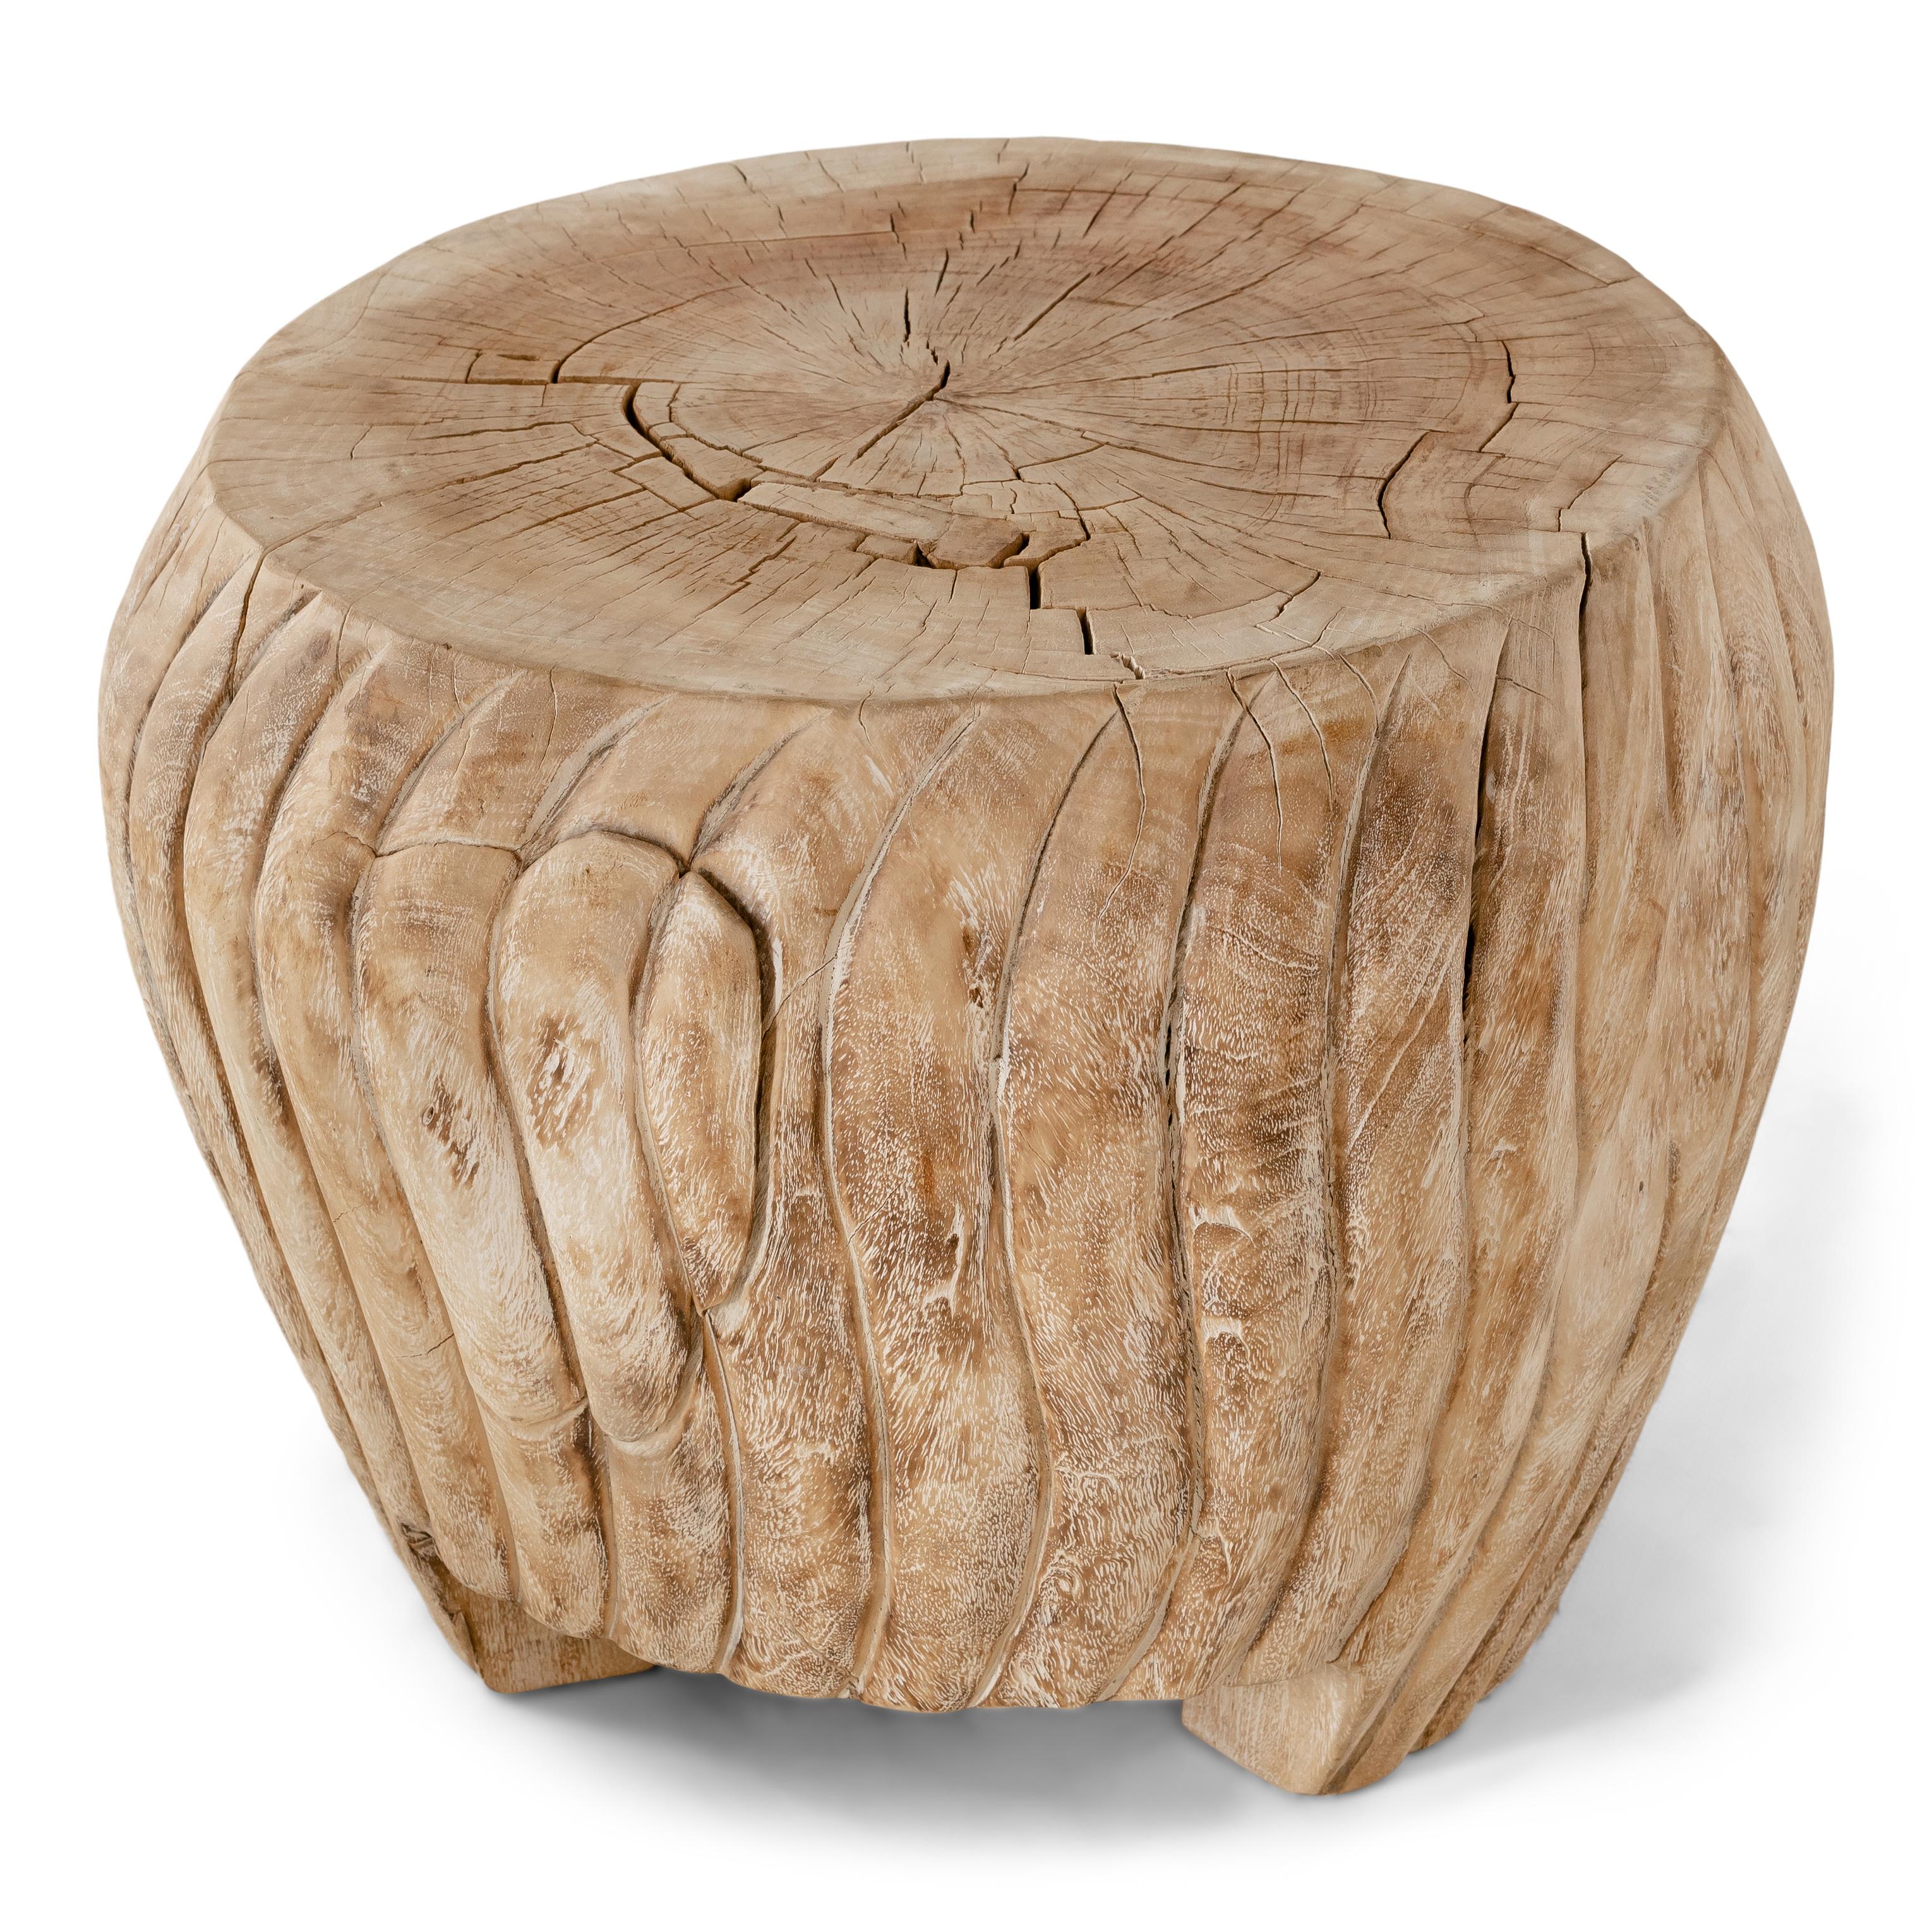 Wood carved end table with a tapered form and grooved details. 

Part of our one of a kind Le Monde collection. Exclusive to Brendan Bass.